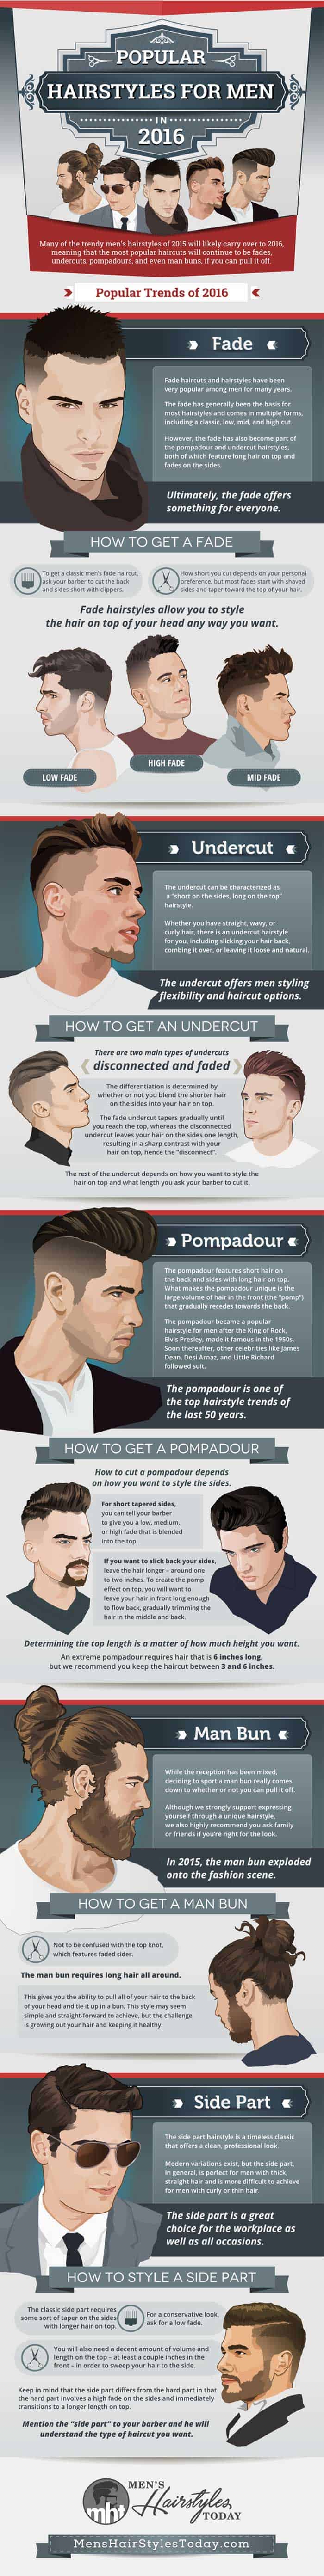 Popular Men's Hairstyles You Have to Try (Infographic) 1